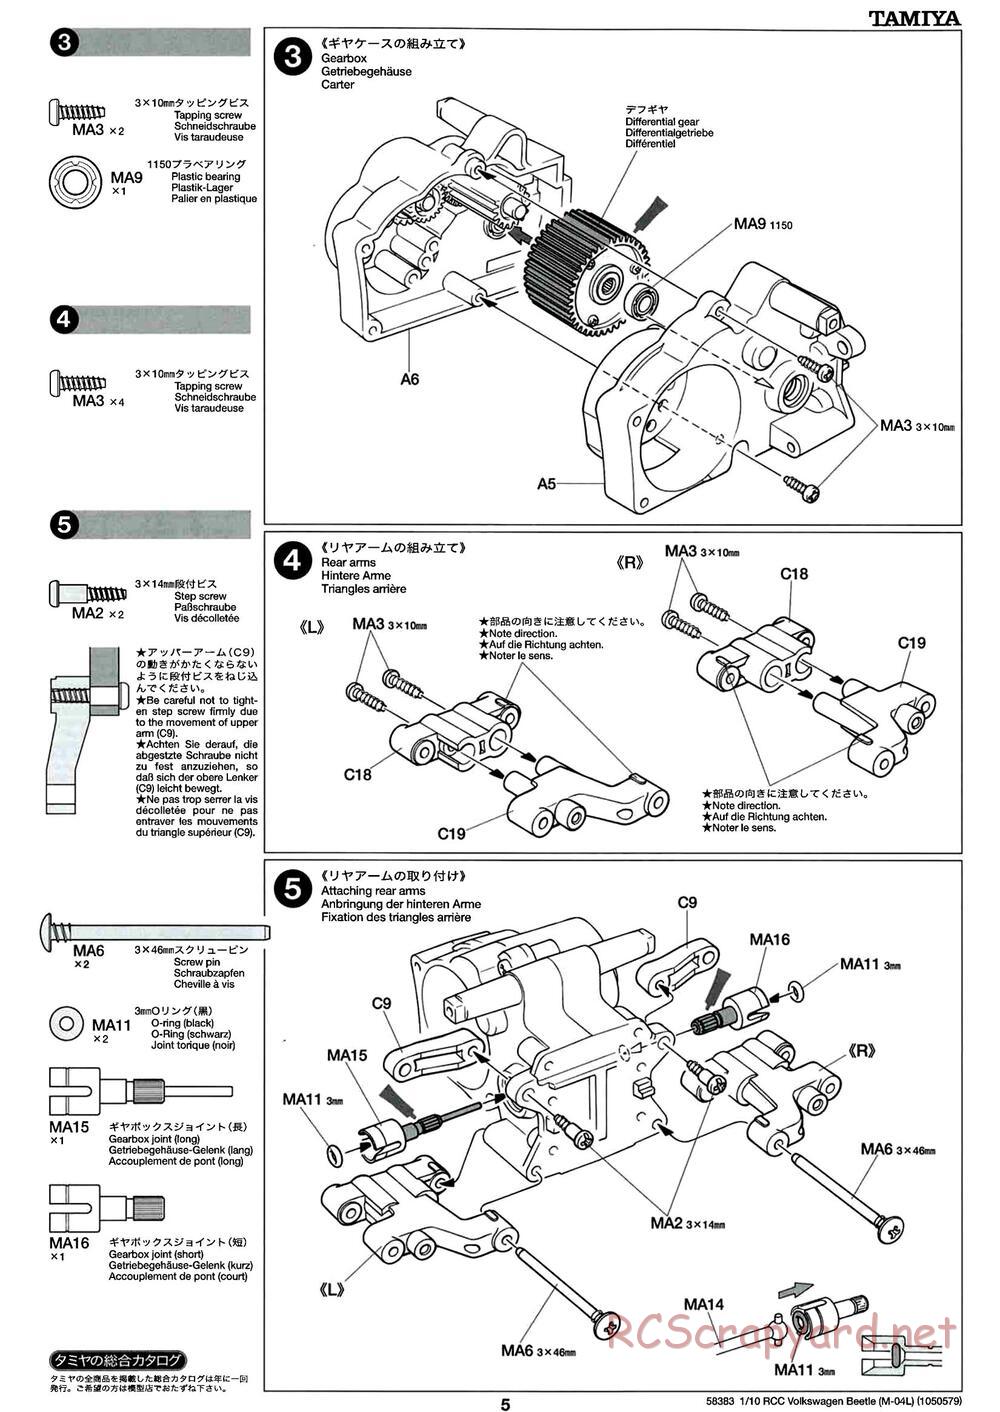 Tamiya - Volkswagen Beetle - M04L Chassis - Manual - Page 5